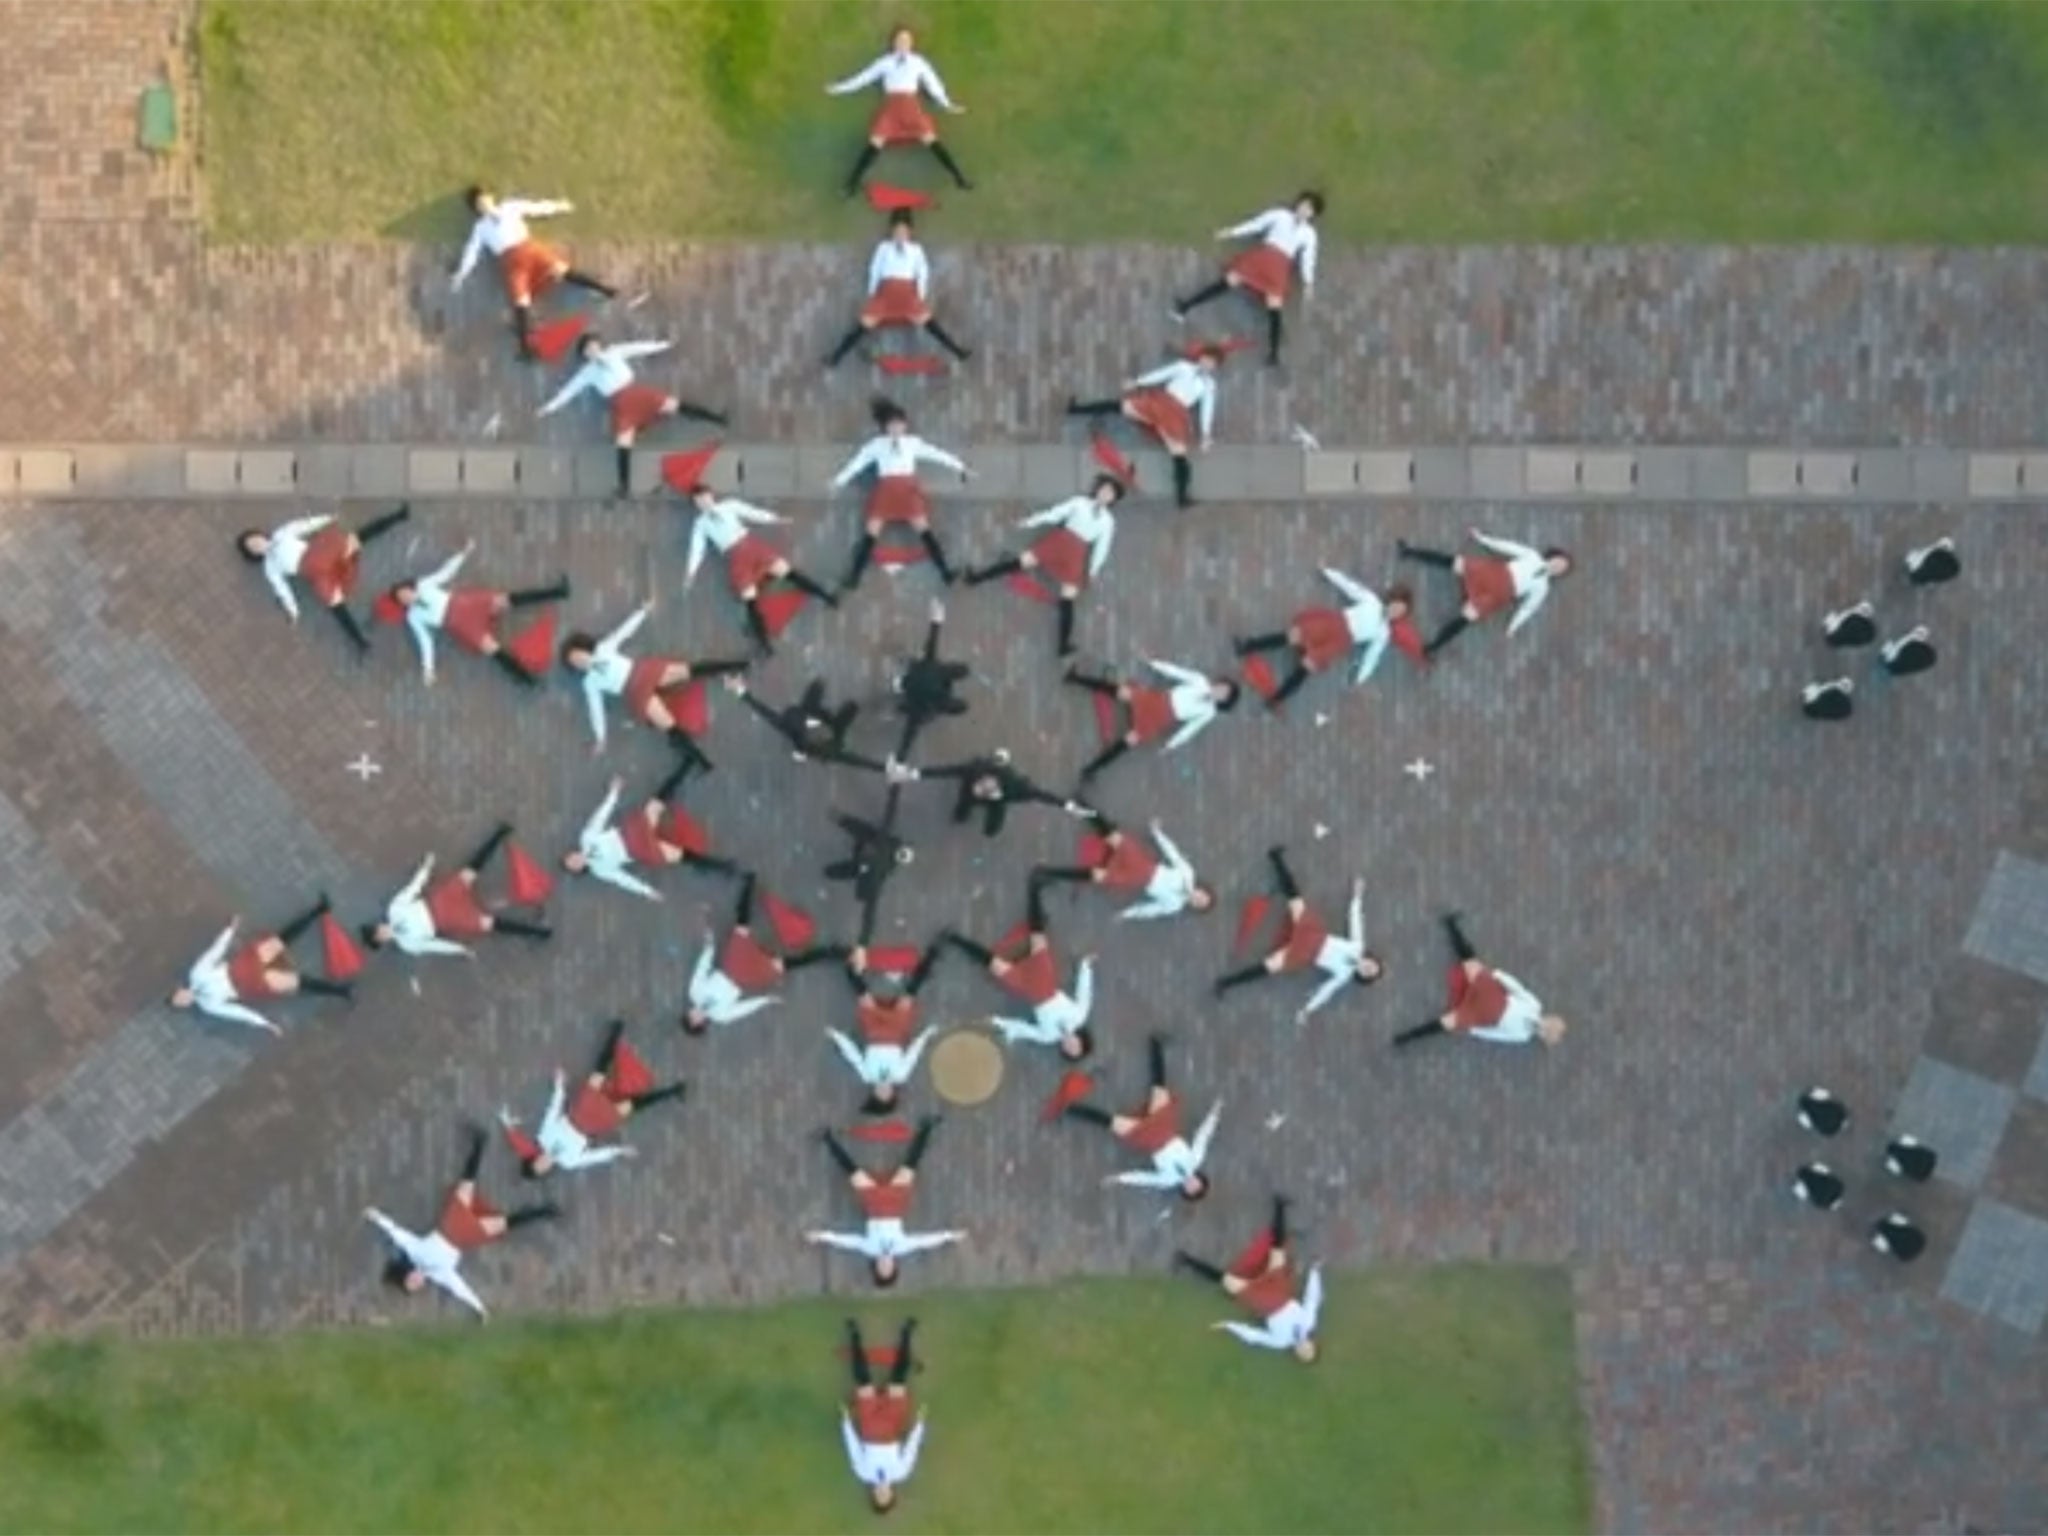 OK Go's new music video features unicycles and synchronised umbrella dancing